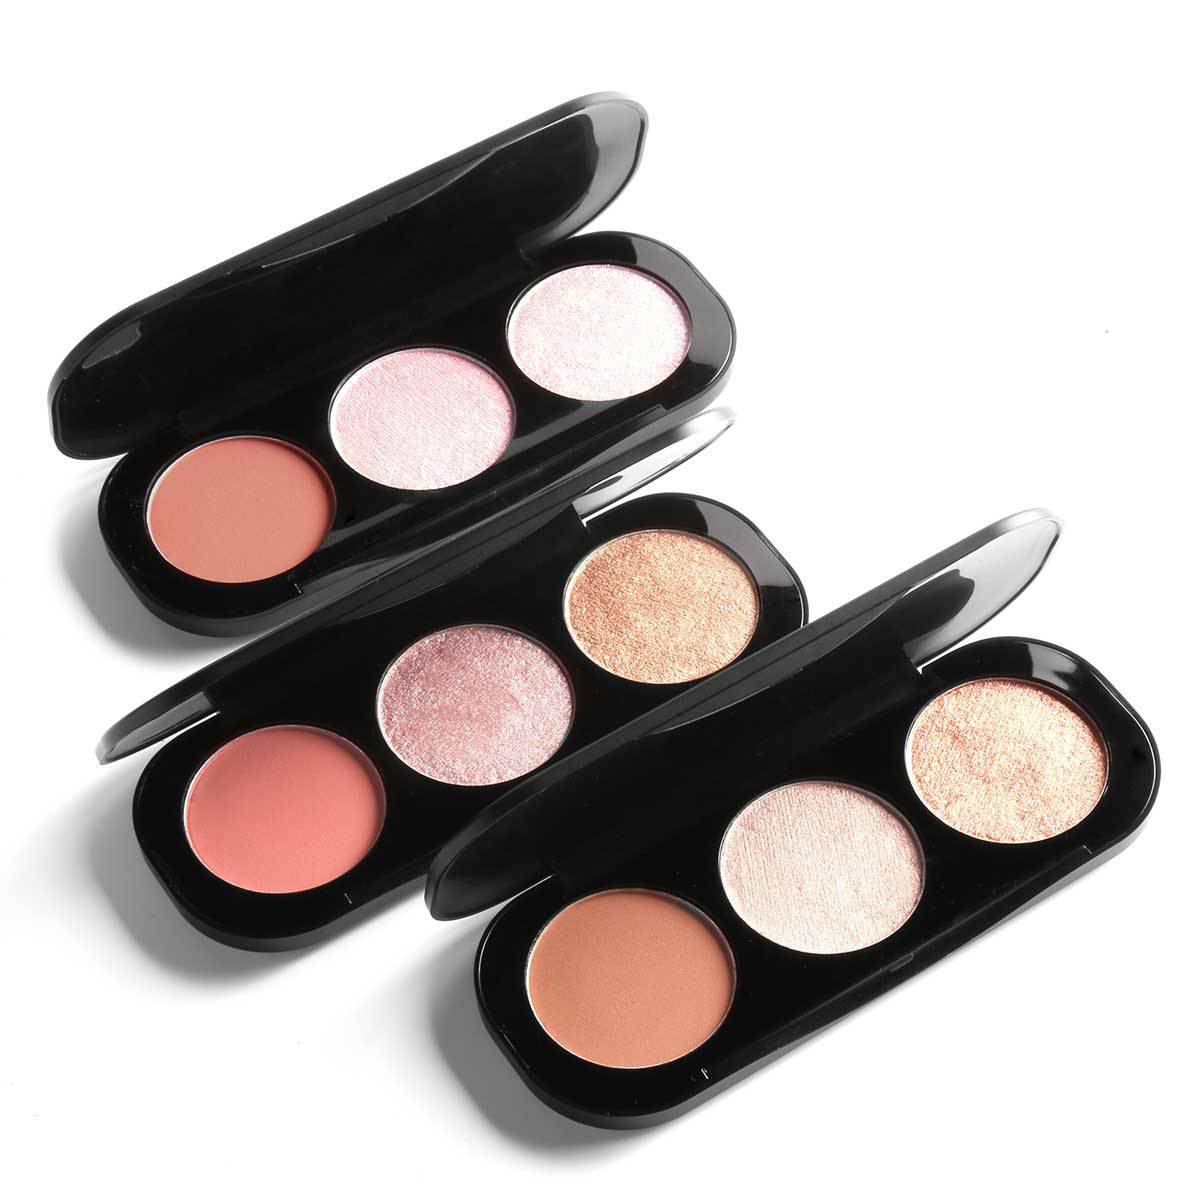 Three-color blush highlighter makeup plate pigmented blusher highlighter makeup cosmetic-FA26